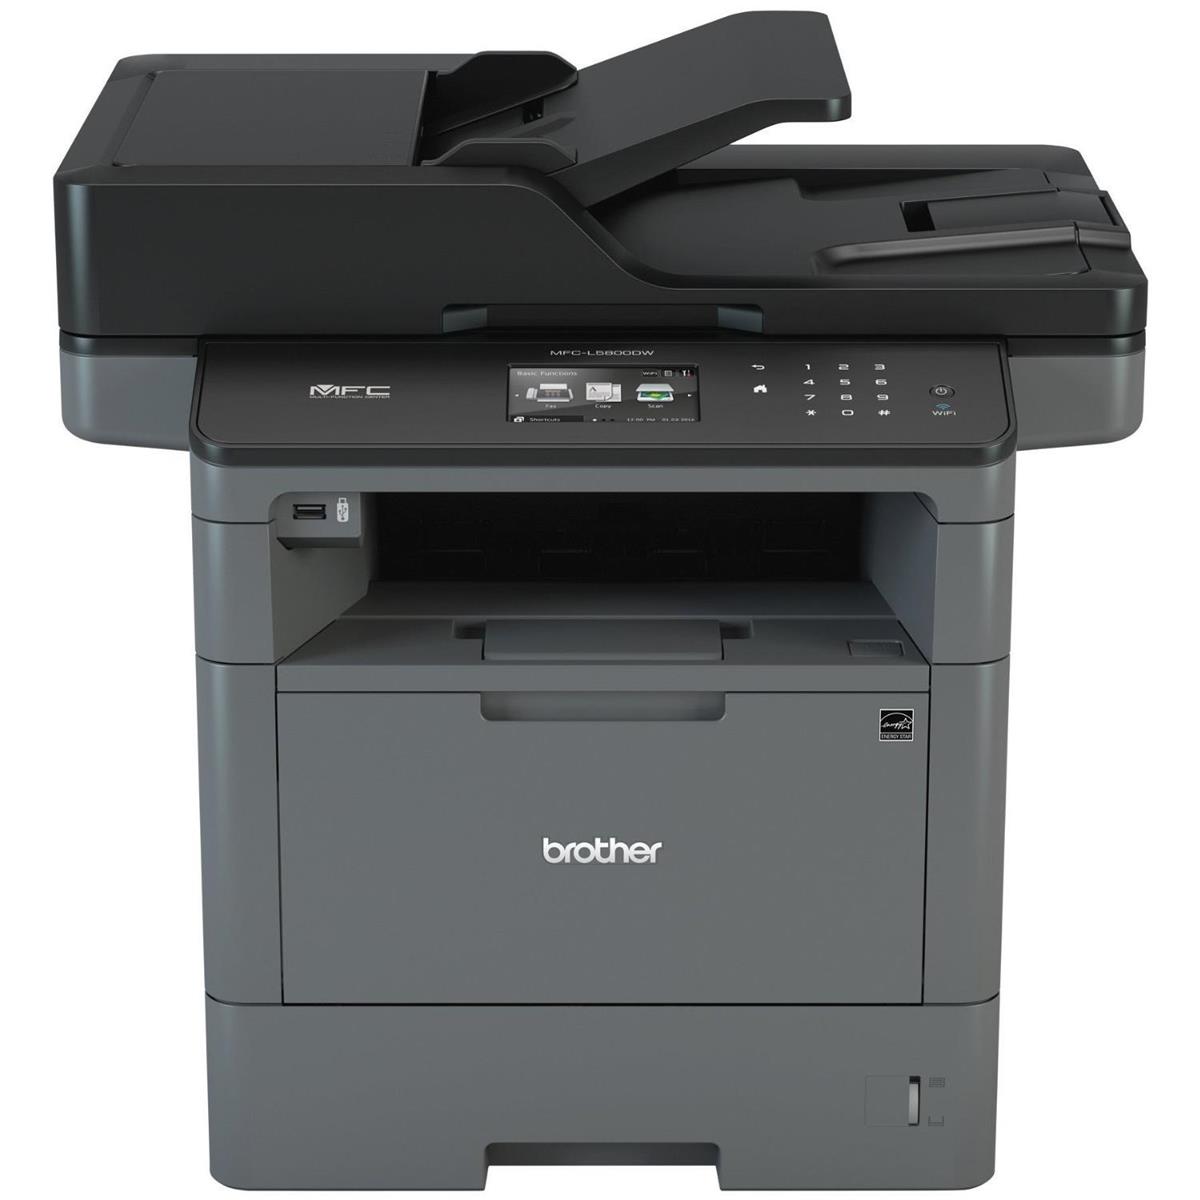 Image of Brother MFC-L5800DW All-in-One Monochrome Laser Printer